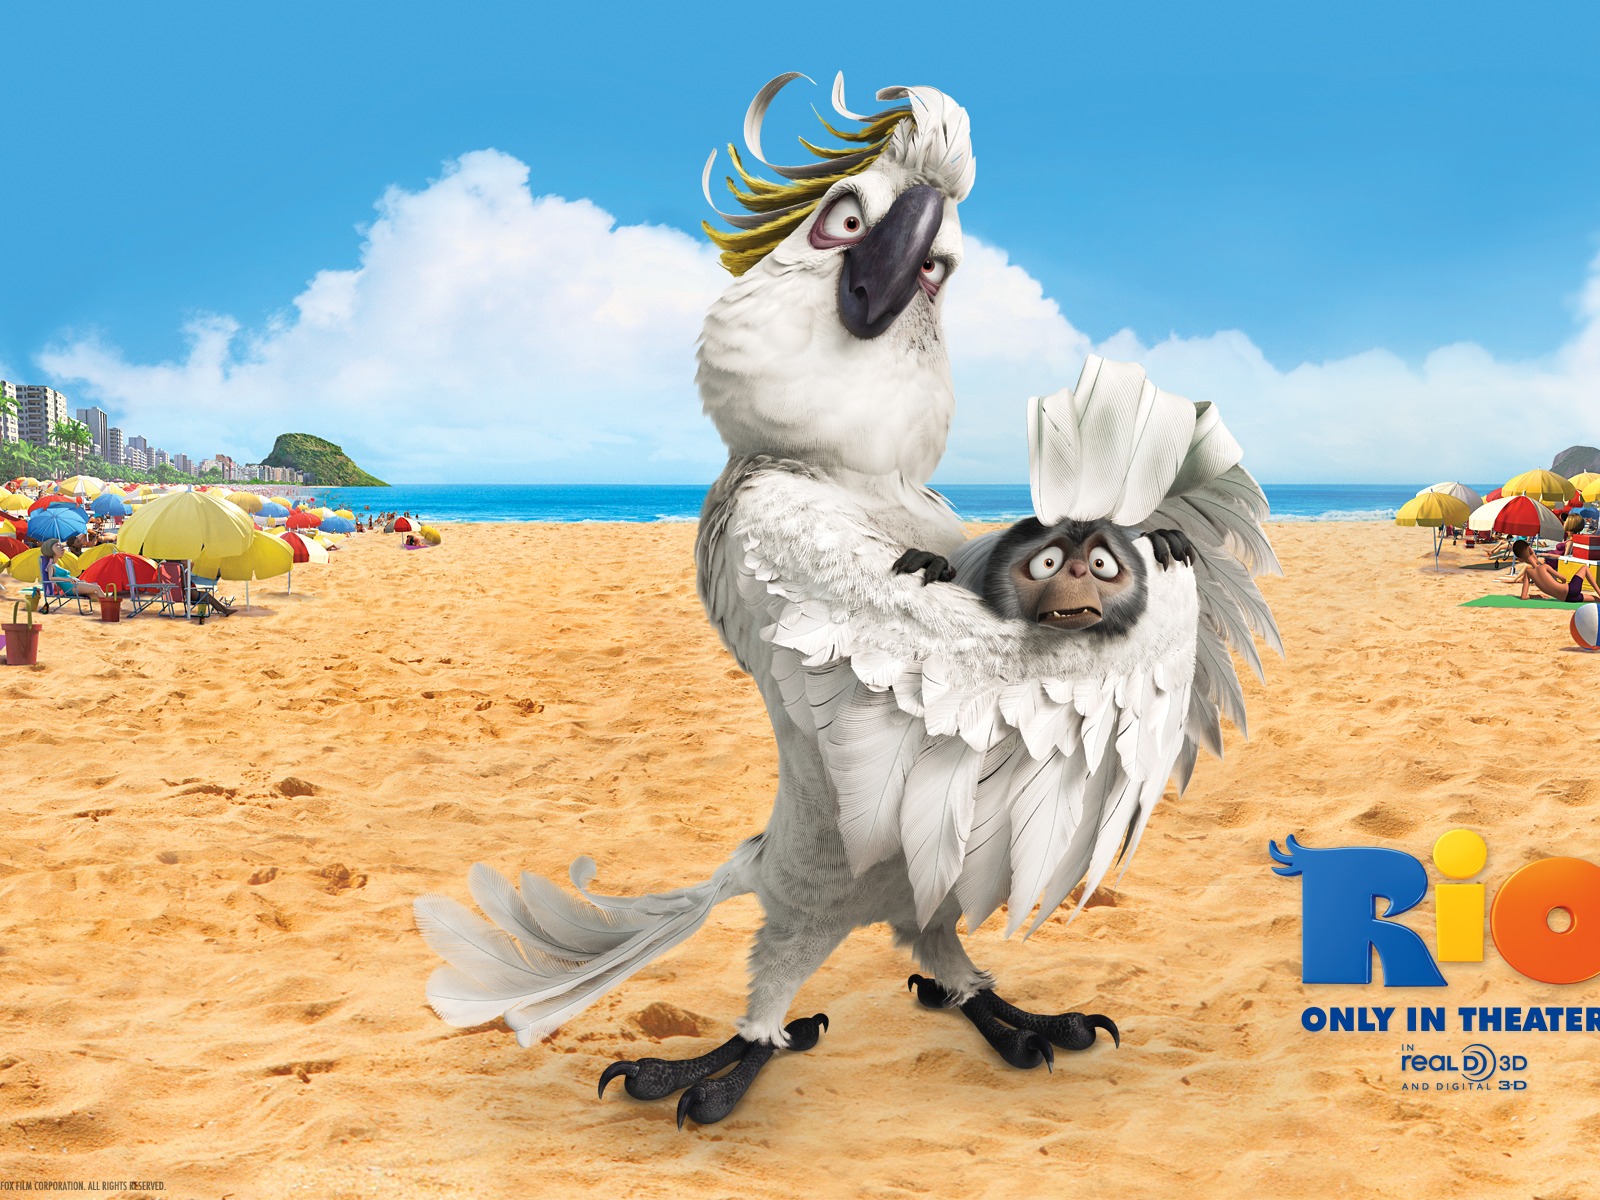 Rio 2011 wallpapers #12 - 1600x1200